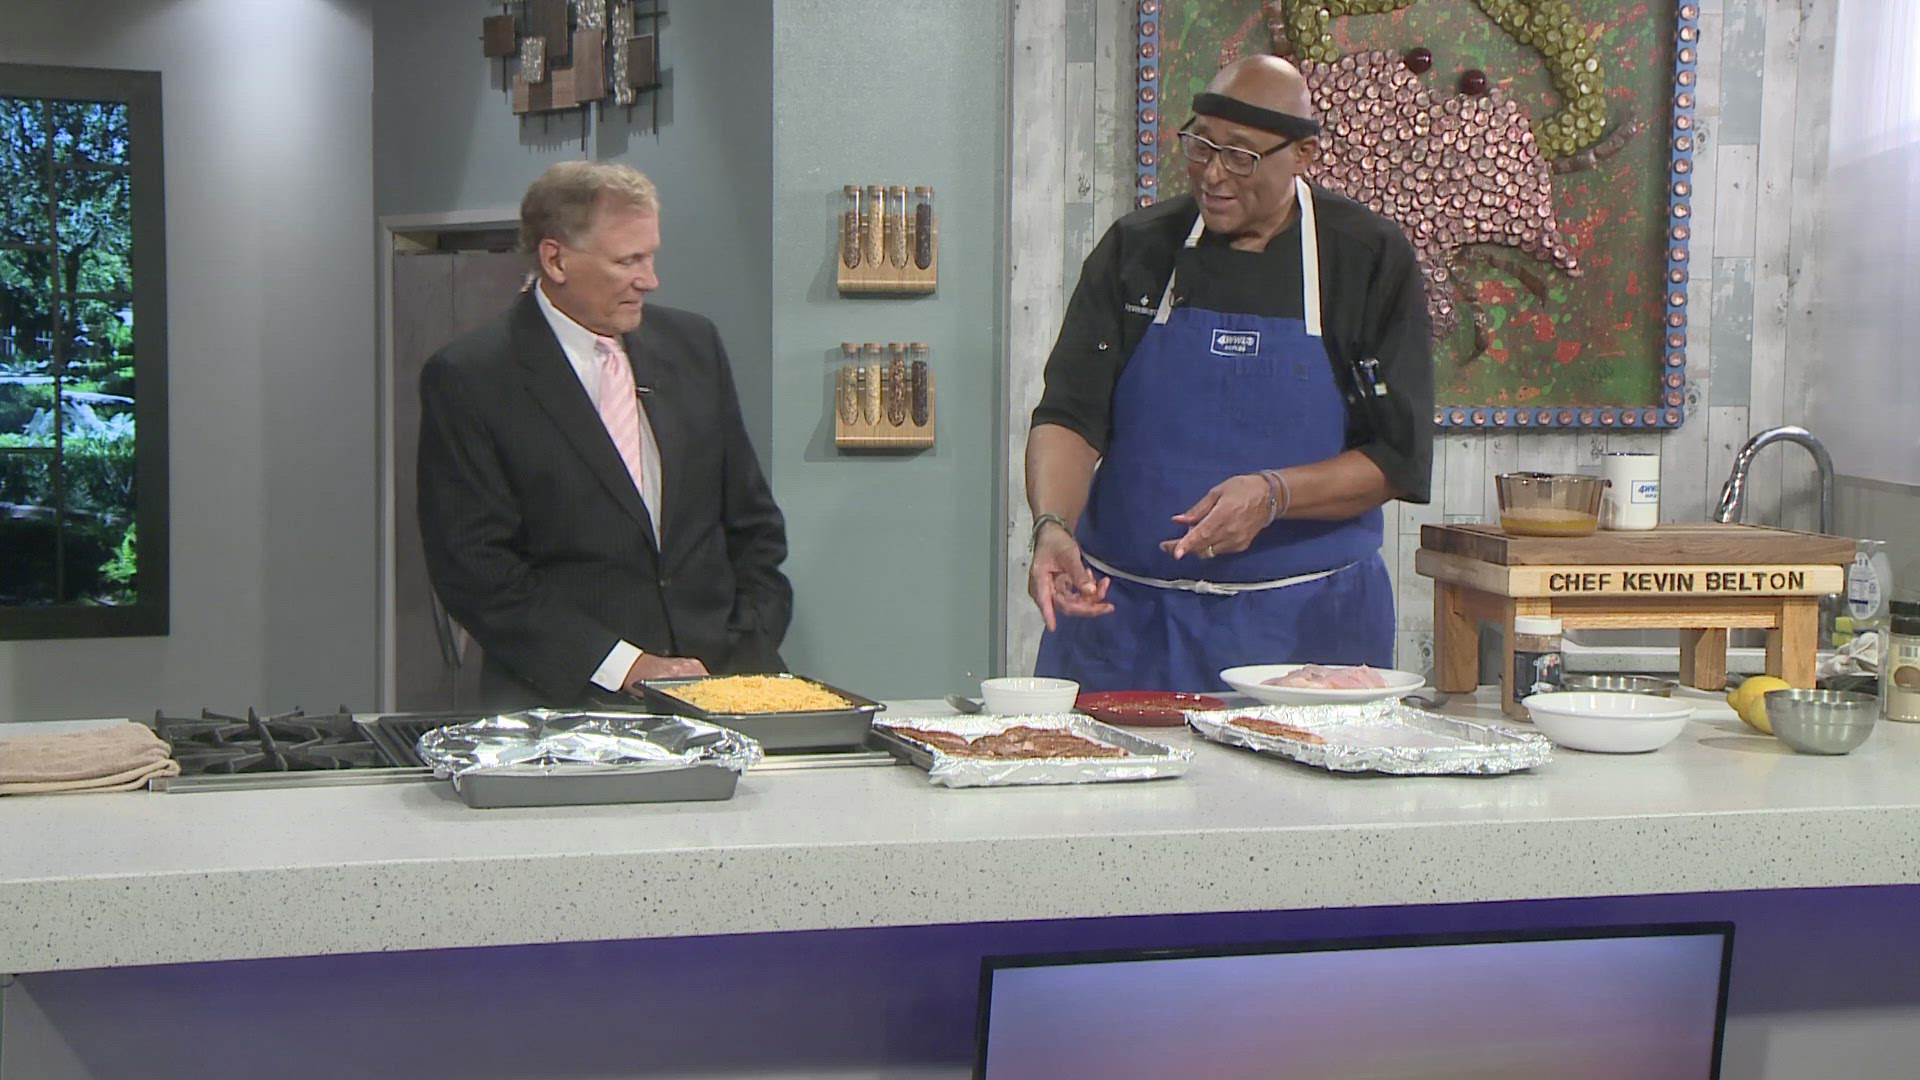 Chef Kevin Belton is cooking up catfish in the WWL Louisiana kitchen.